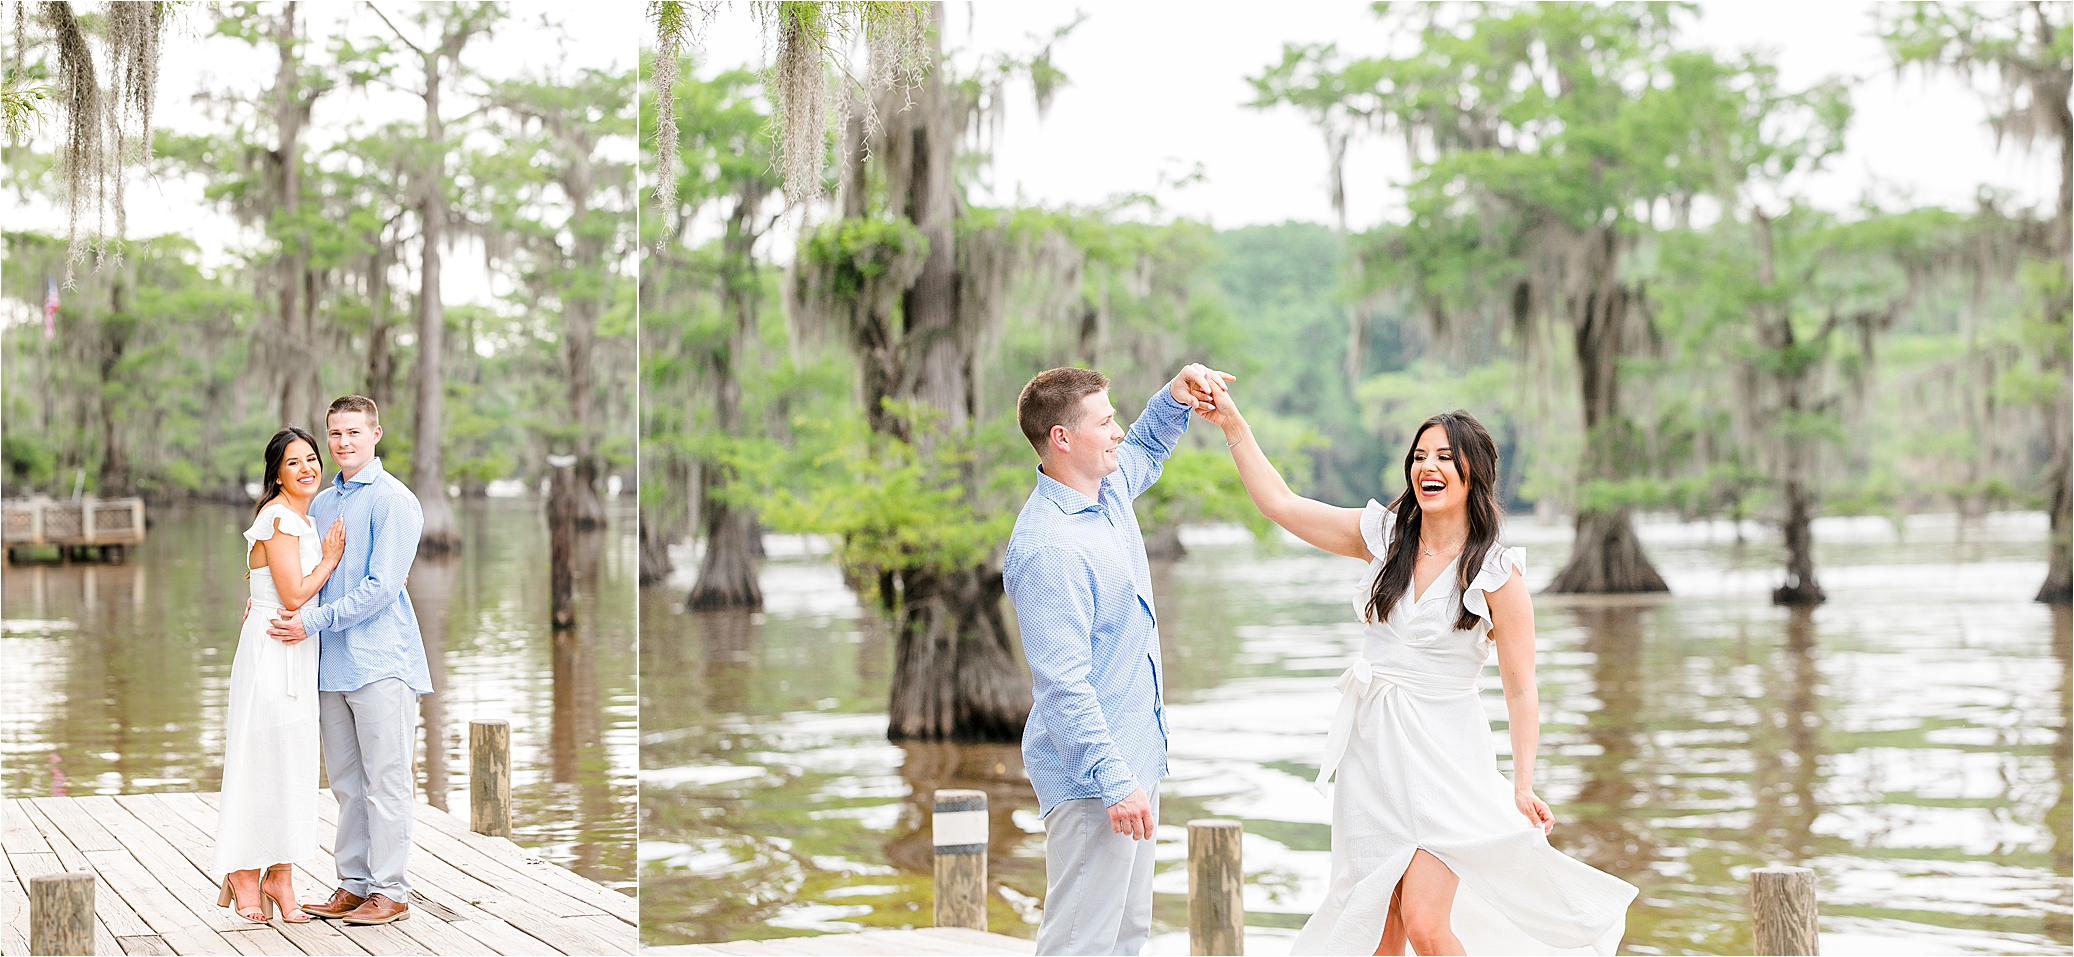 A couple dancing on the docks at Caddo Lake State Park in East Texas by DFW Engagement Photographer Jillian Hogan 